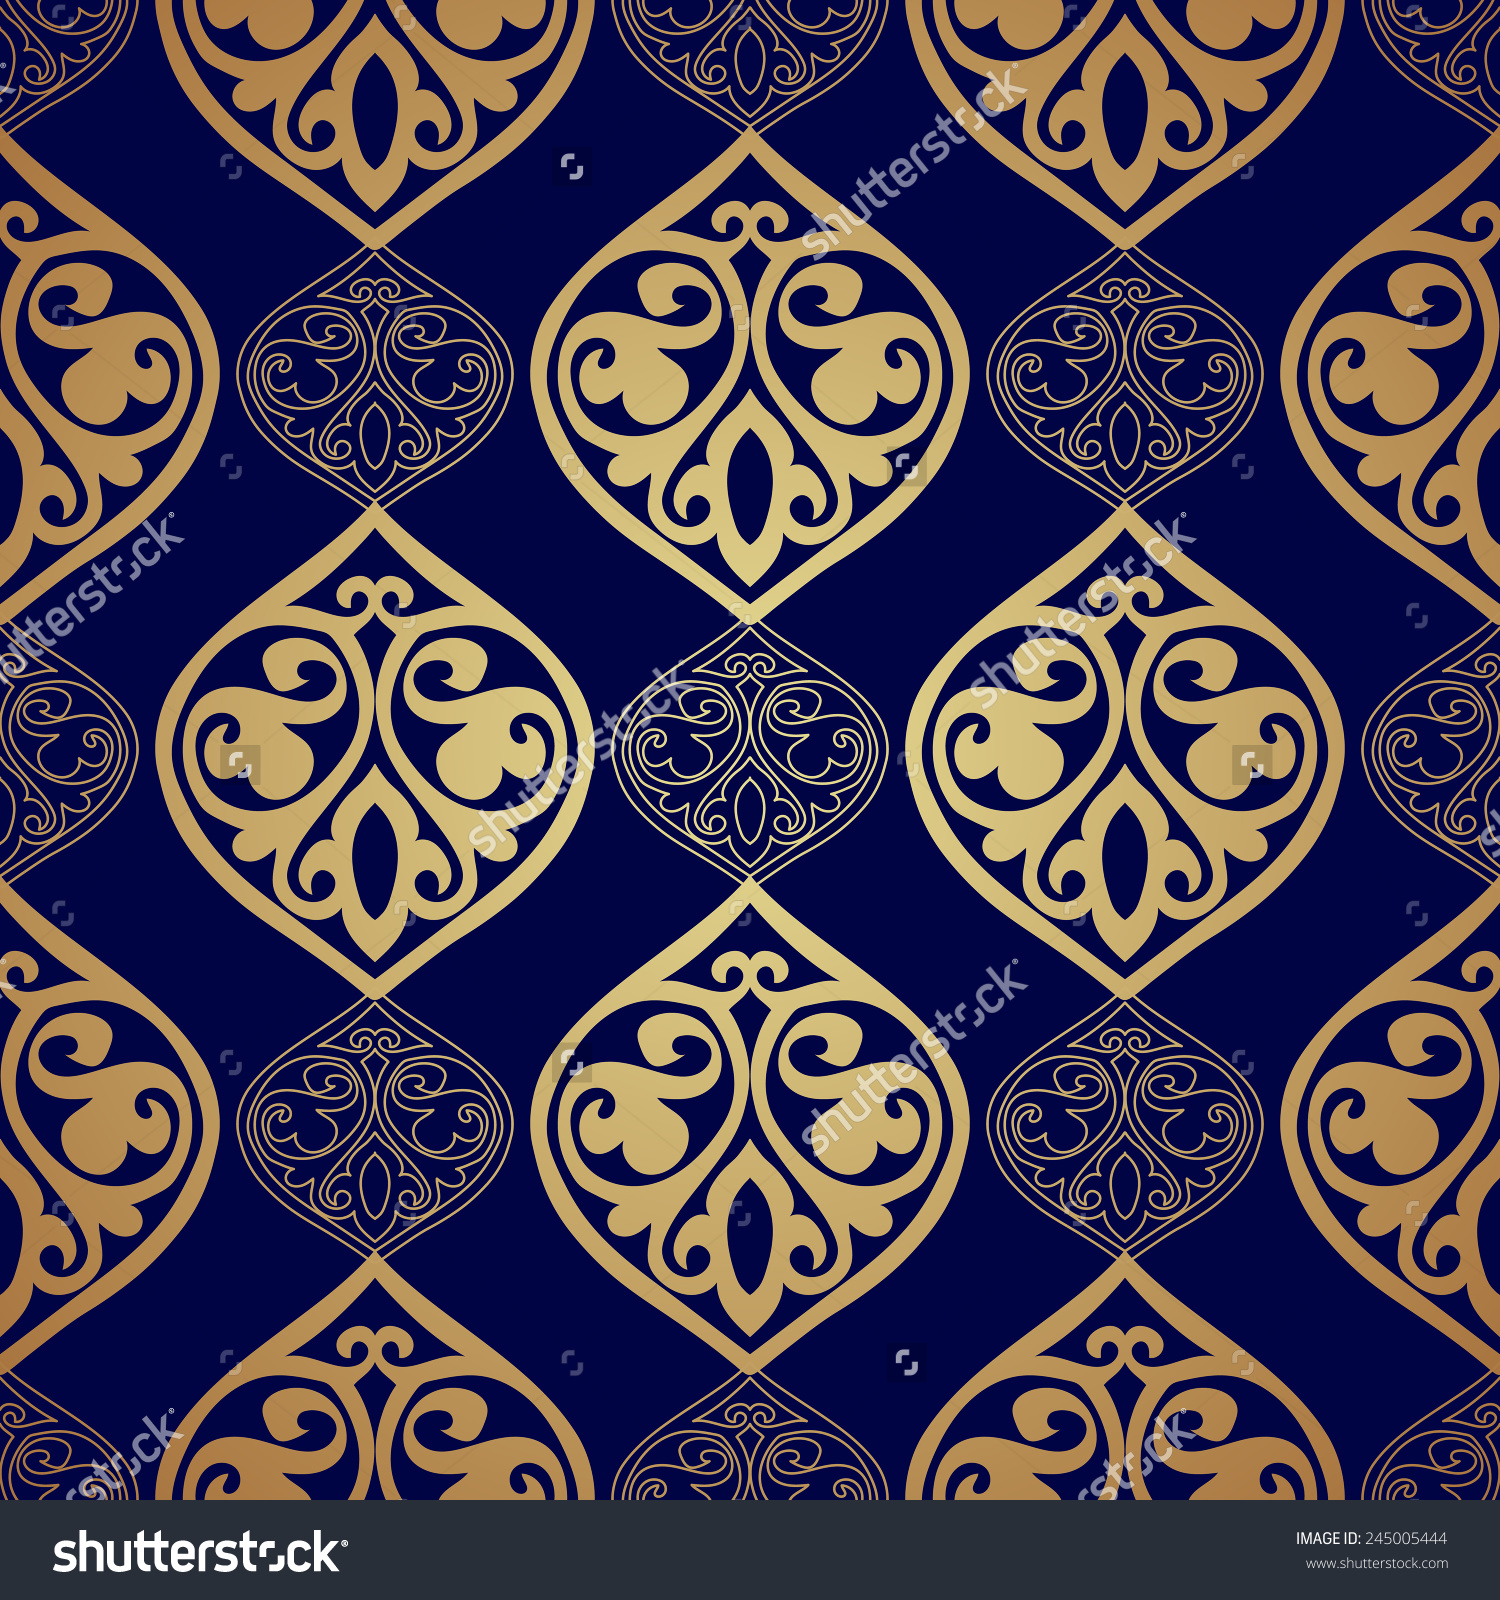 Nice Images Collection: Gold Blue Desktop Wallpapers